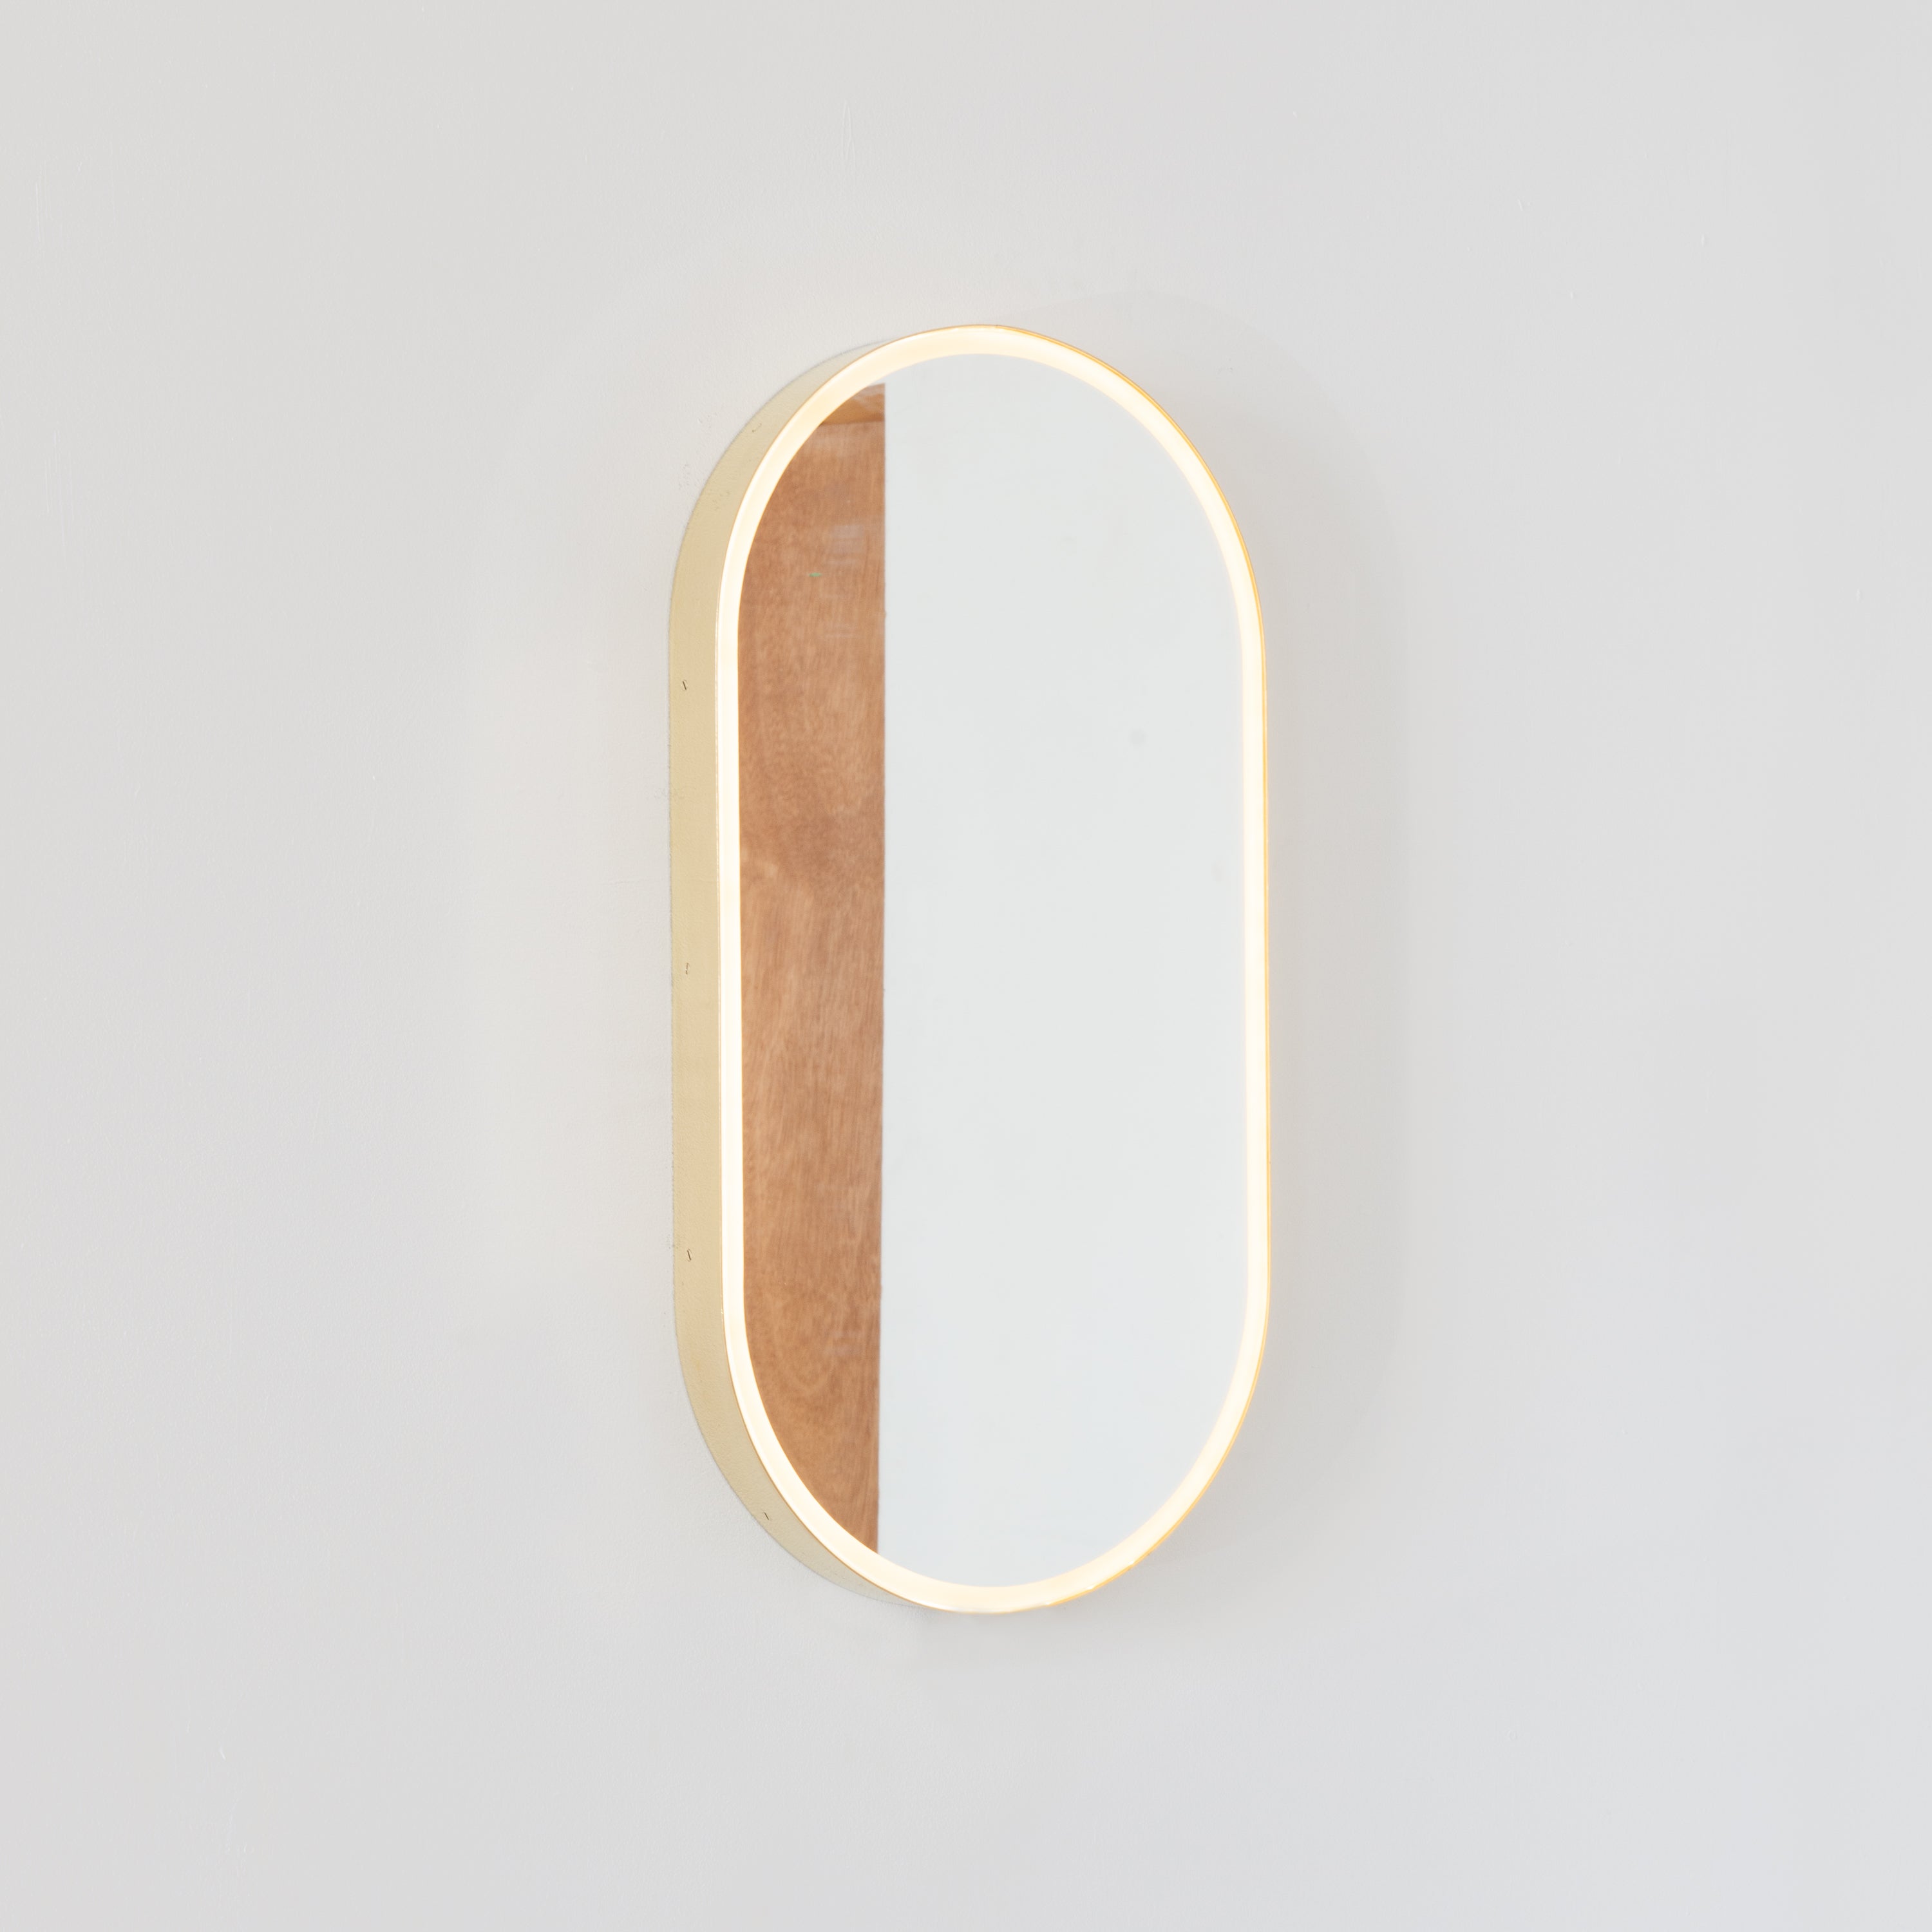 Capsula Illuminated Capsule Shaped Customisable Mirror with Brass Frame, Large For Sale 2